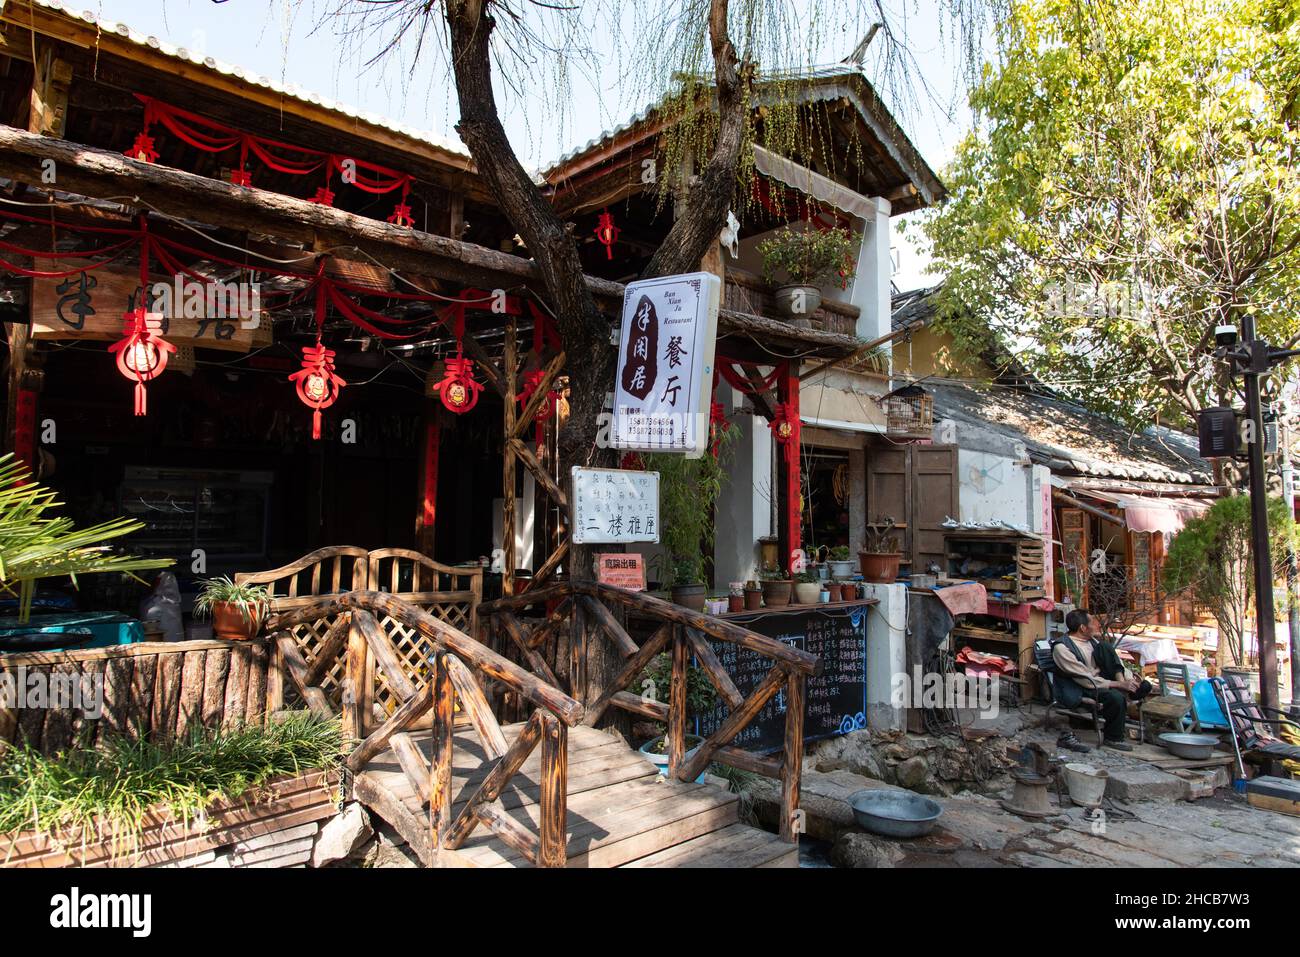 Shaxi. Halfway between Dali and Lijiang, a real ancient city with an ancient flavor and still retains the most original architectural features. Stock Photo